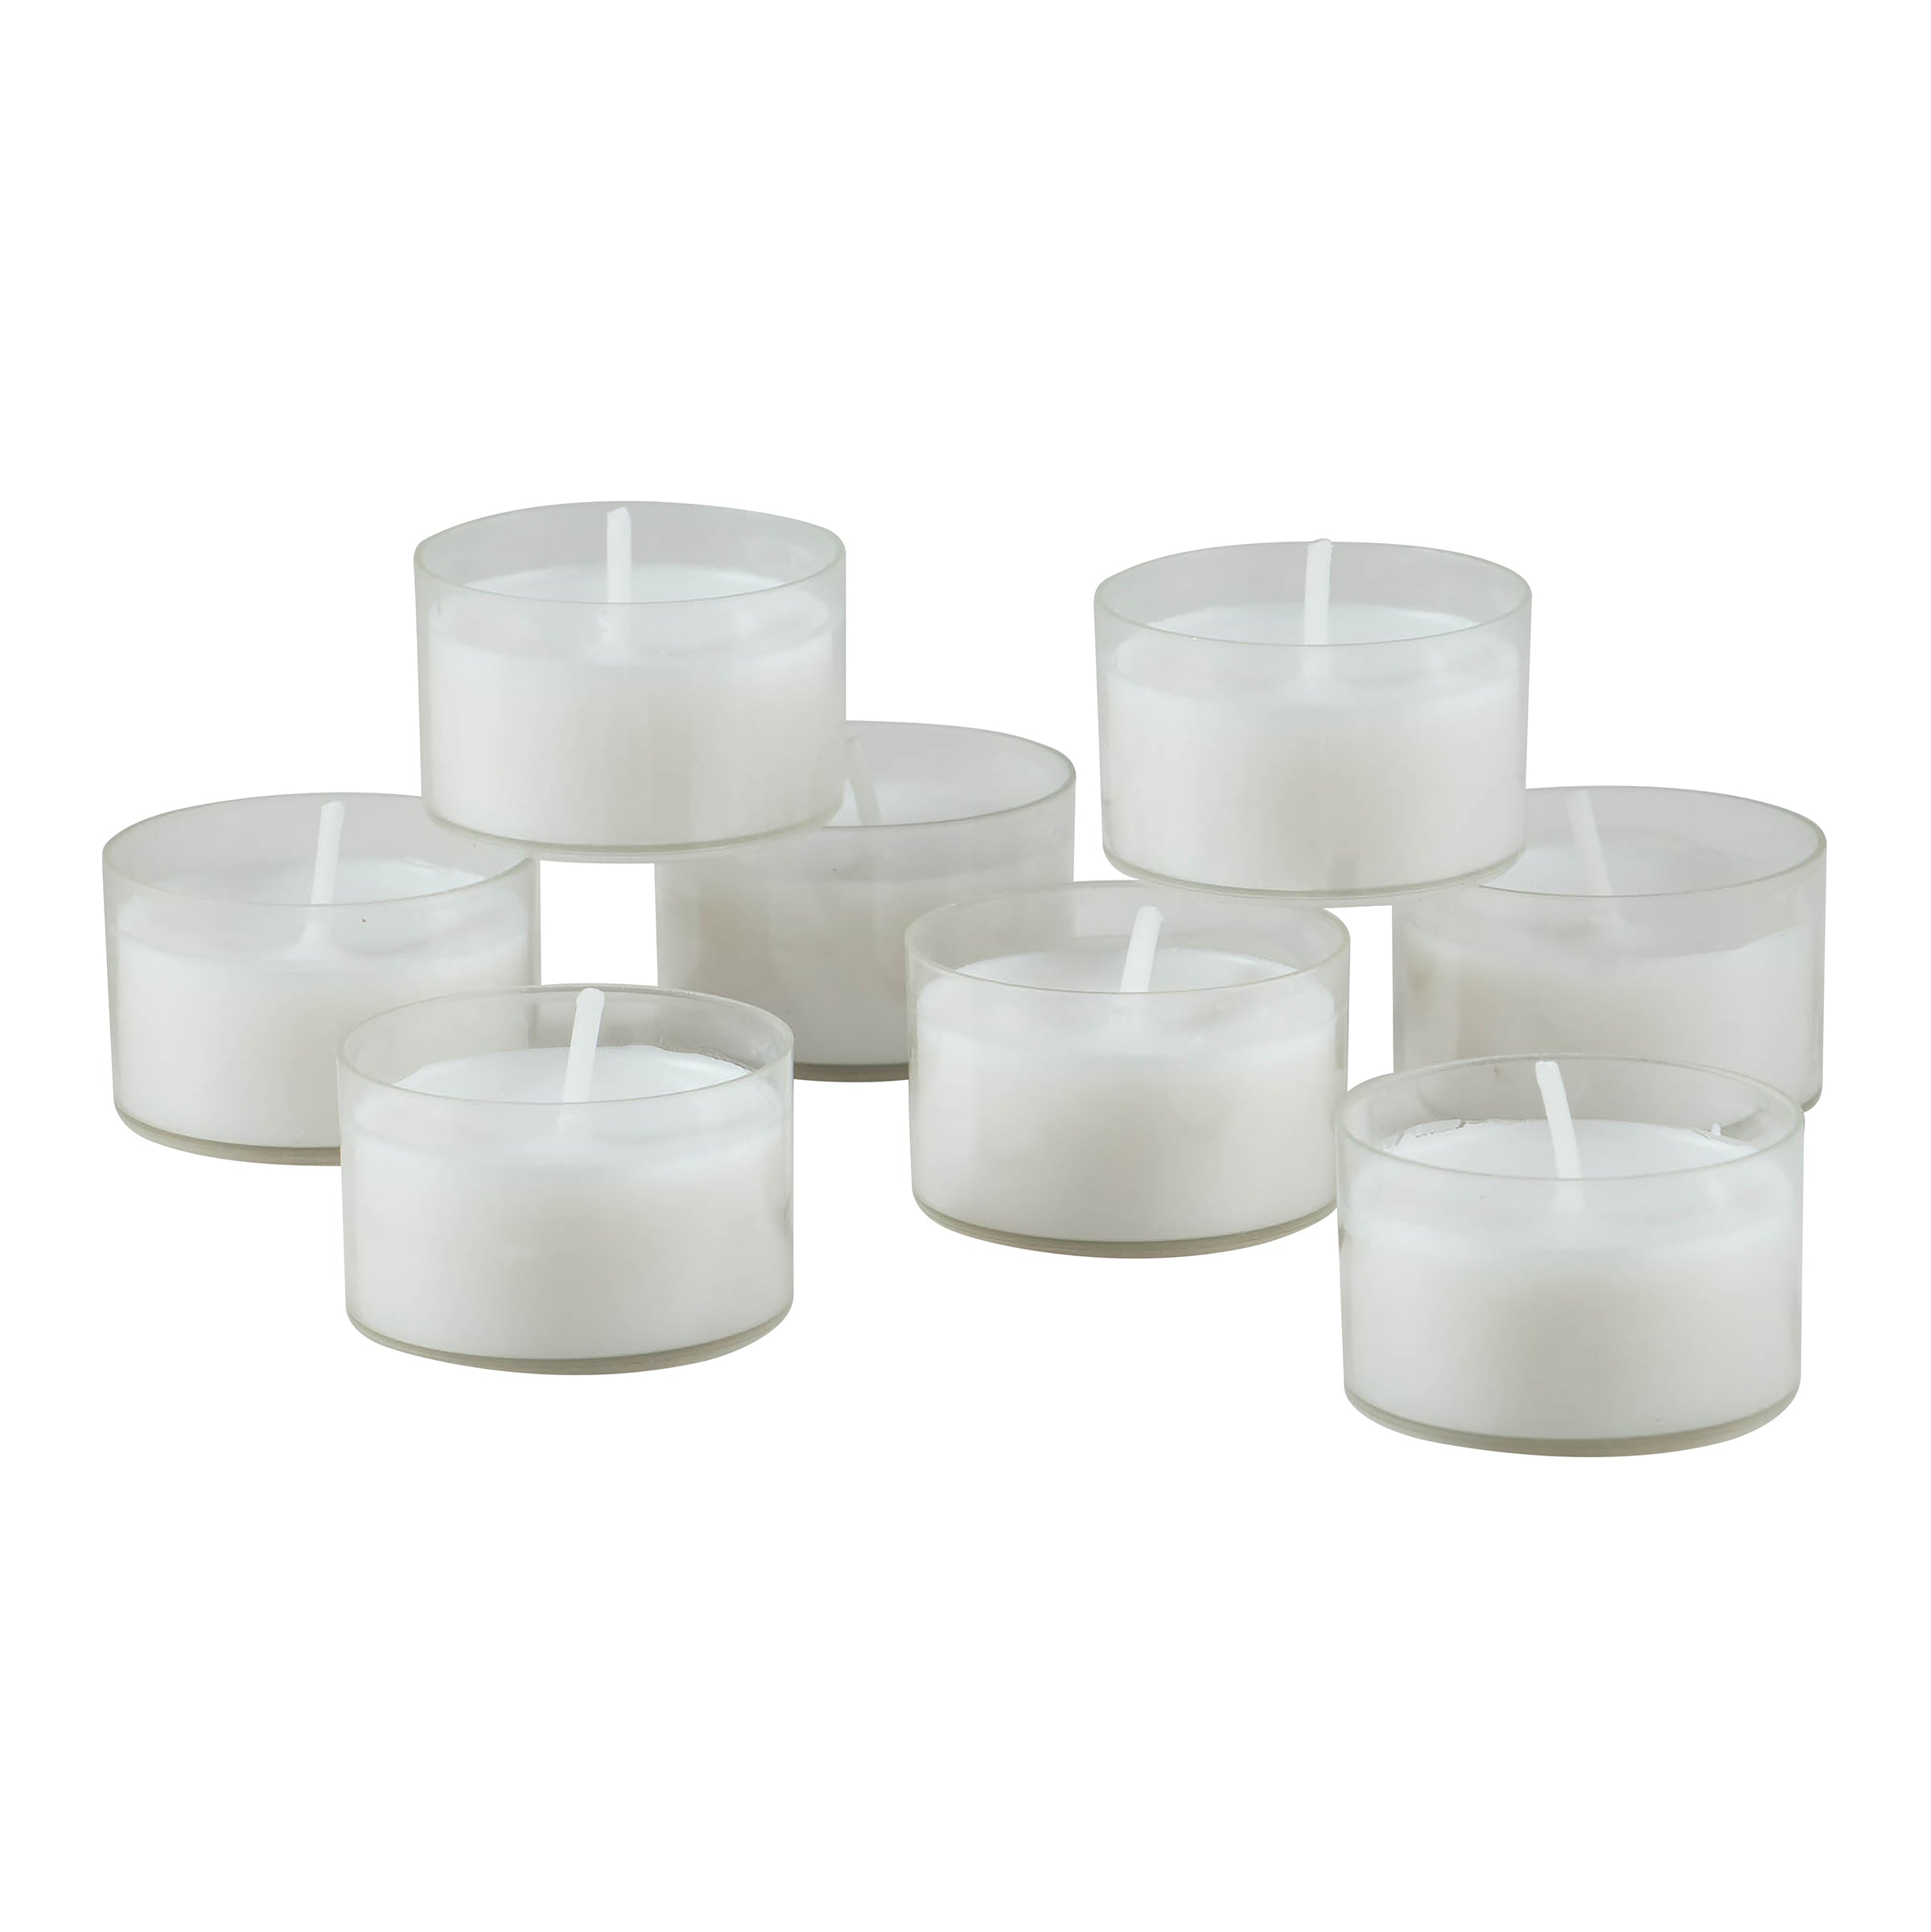 100 X Tea Lights 6 Hour Long Burn Night Light Candles White Unscented Candles  100 Count CT Bulk Wholesale 10 Candles 25, 50, 75, 200 Holiday 